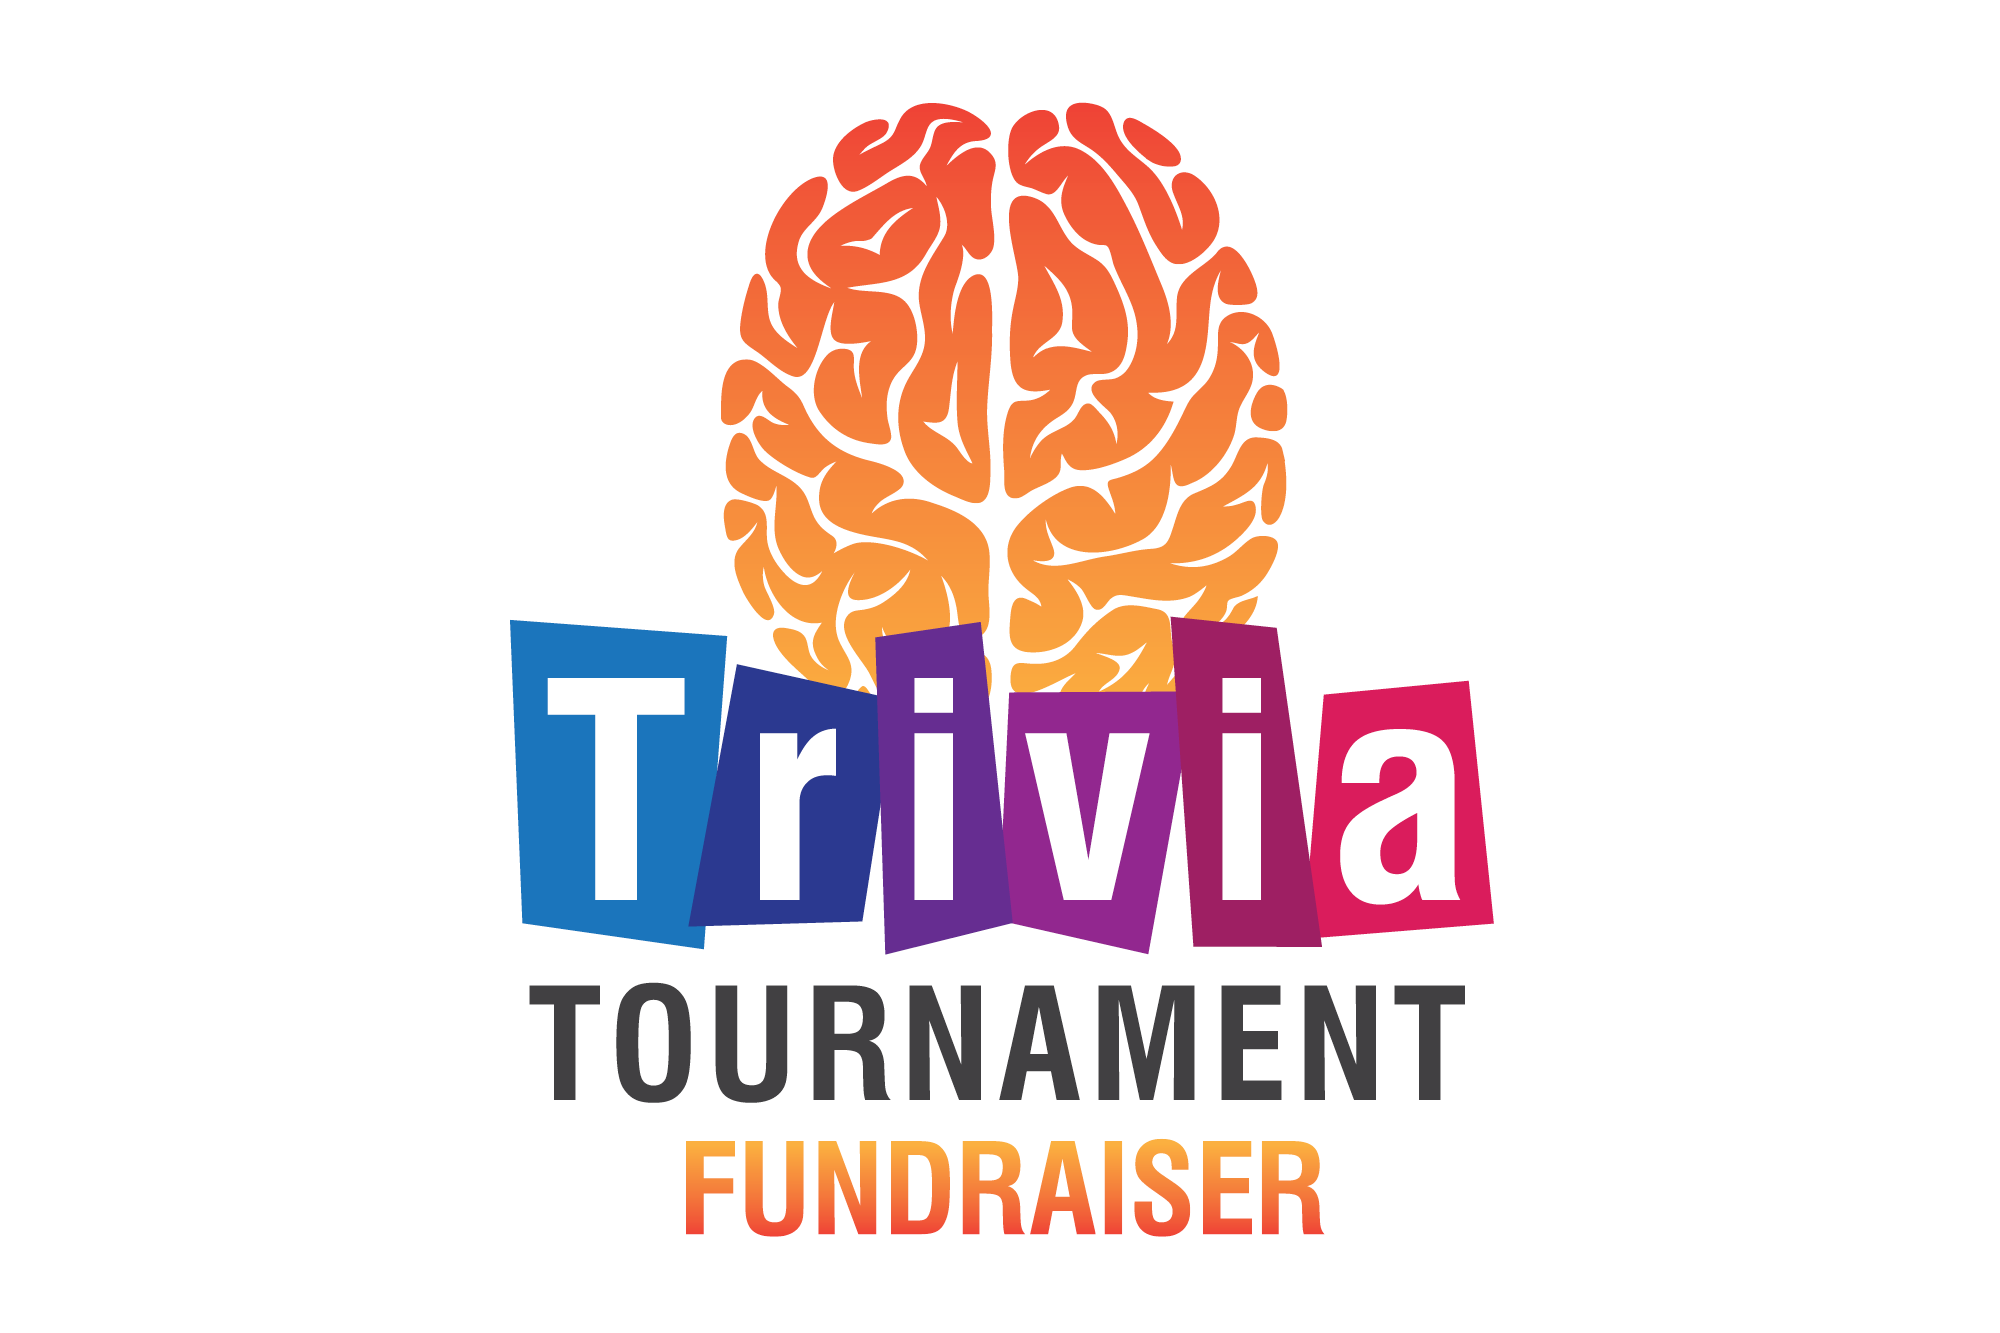 Image with the words "Trivia Tournament Fundraiser."